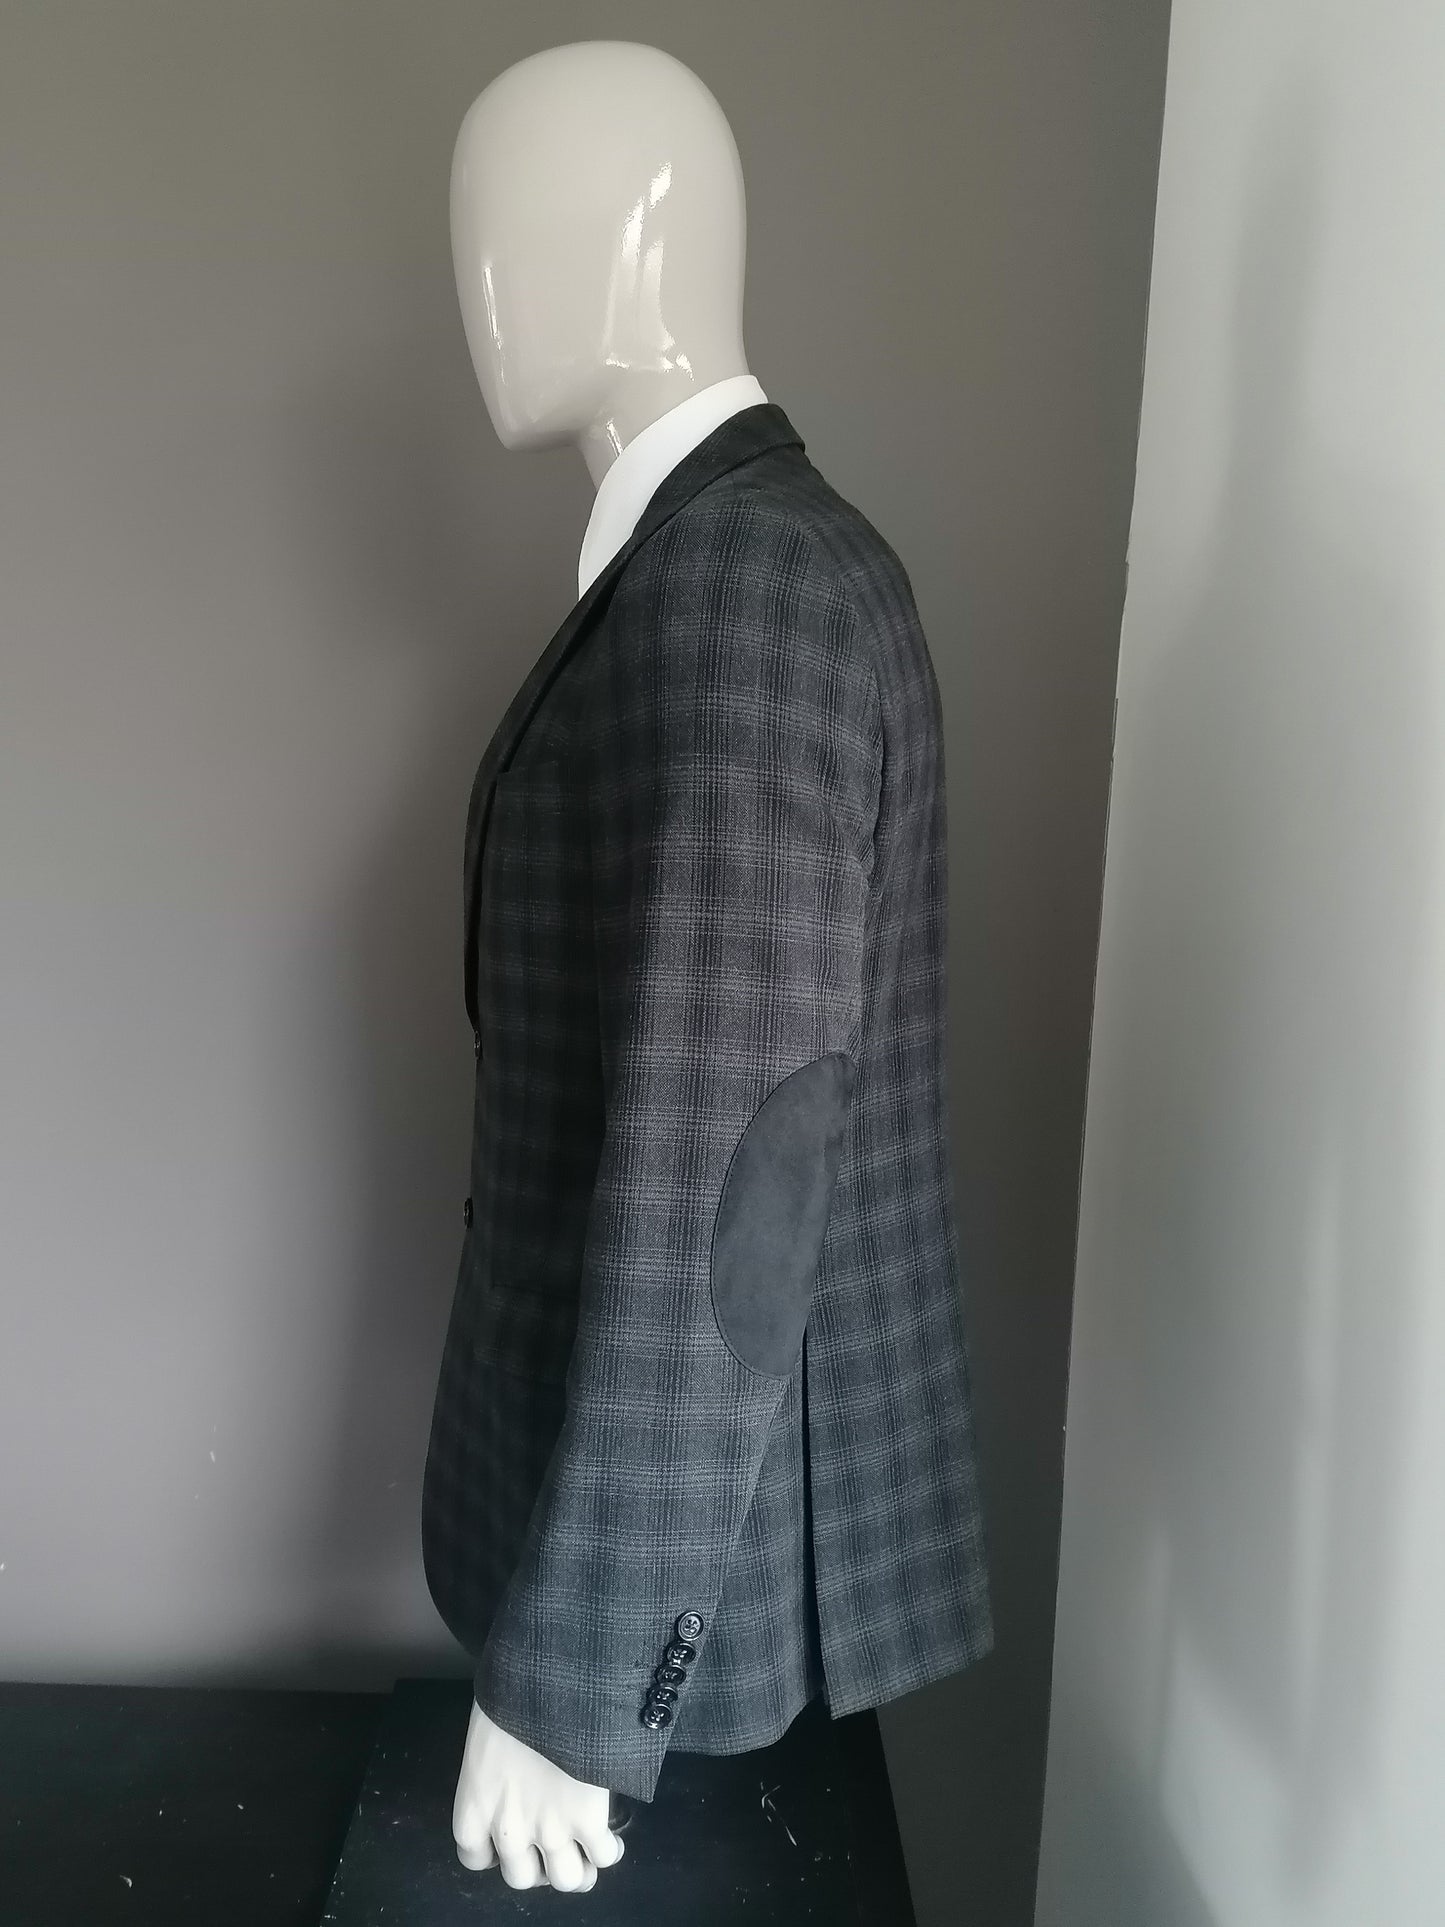 Gentiluomo woolen jacket with elbow patches. Gray checkered. Size 52 / L.